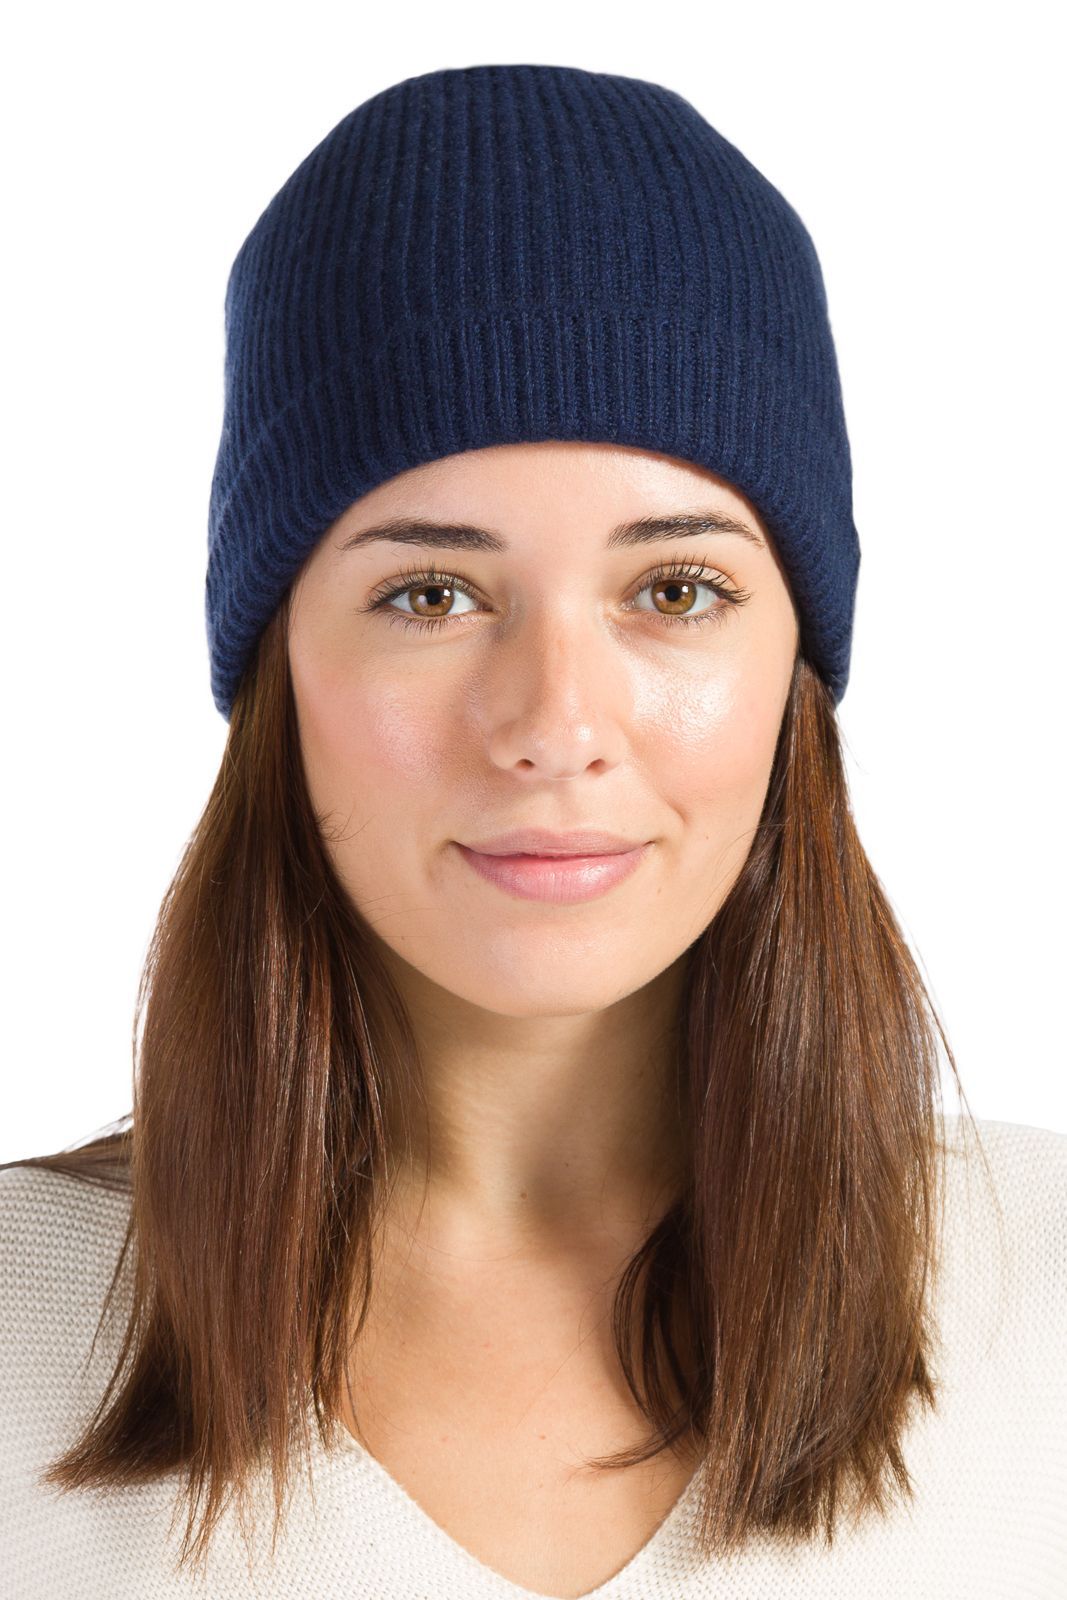 Women's 100% Pure Cashmere Ribbed Hat with Cuff Womens>Accessories>Hat Fishers Finery Navy One Size Fits Most 